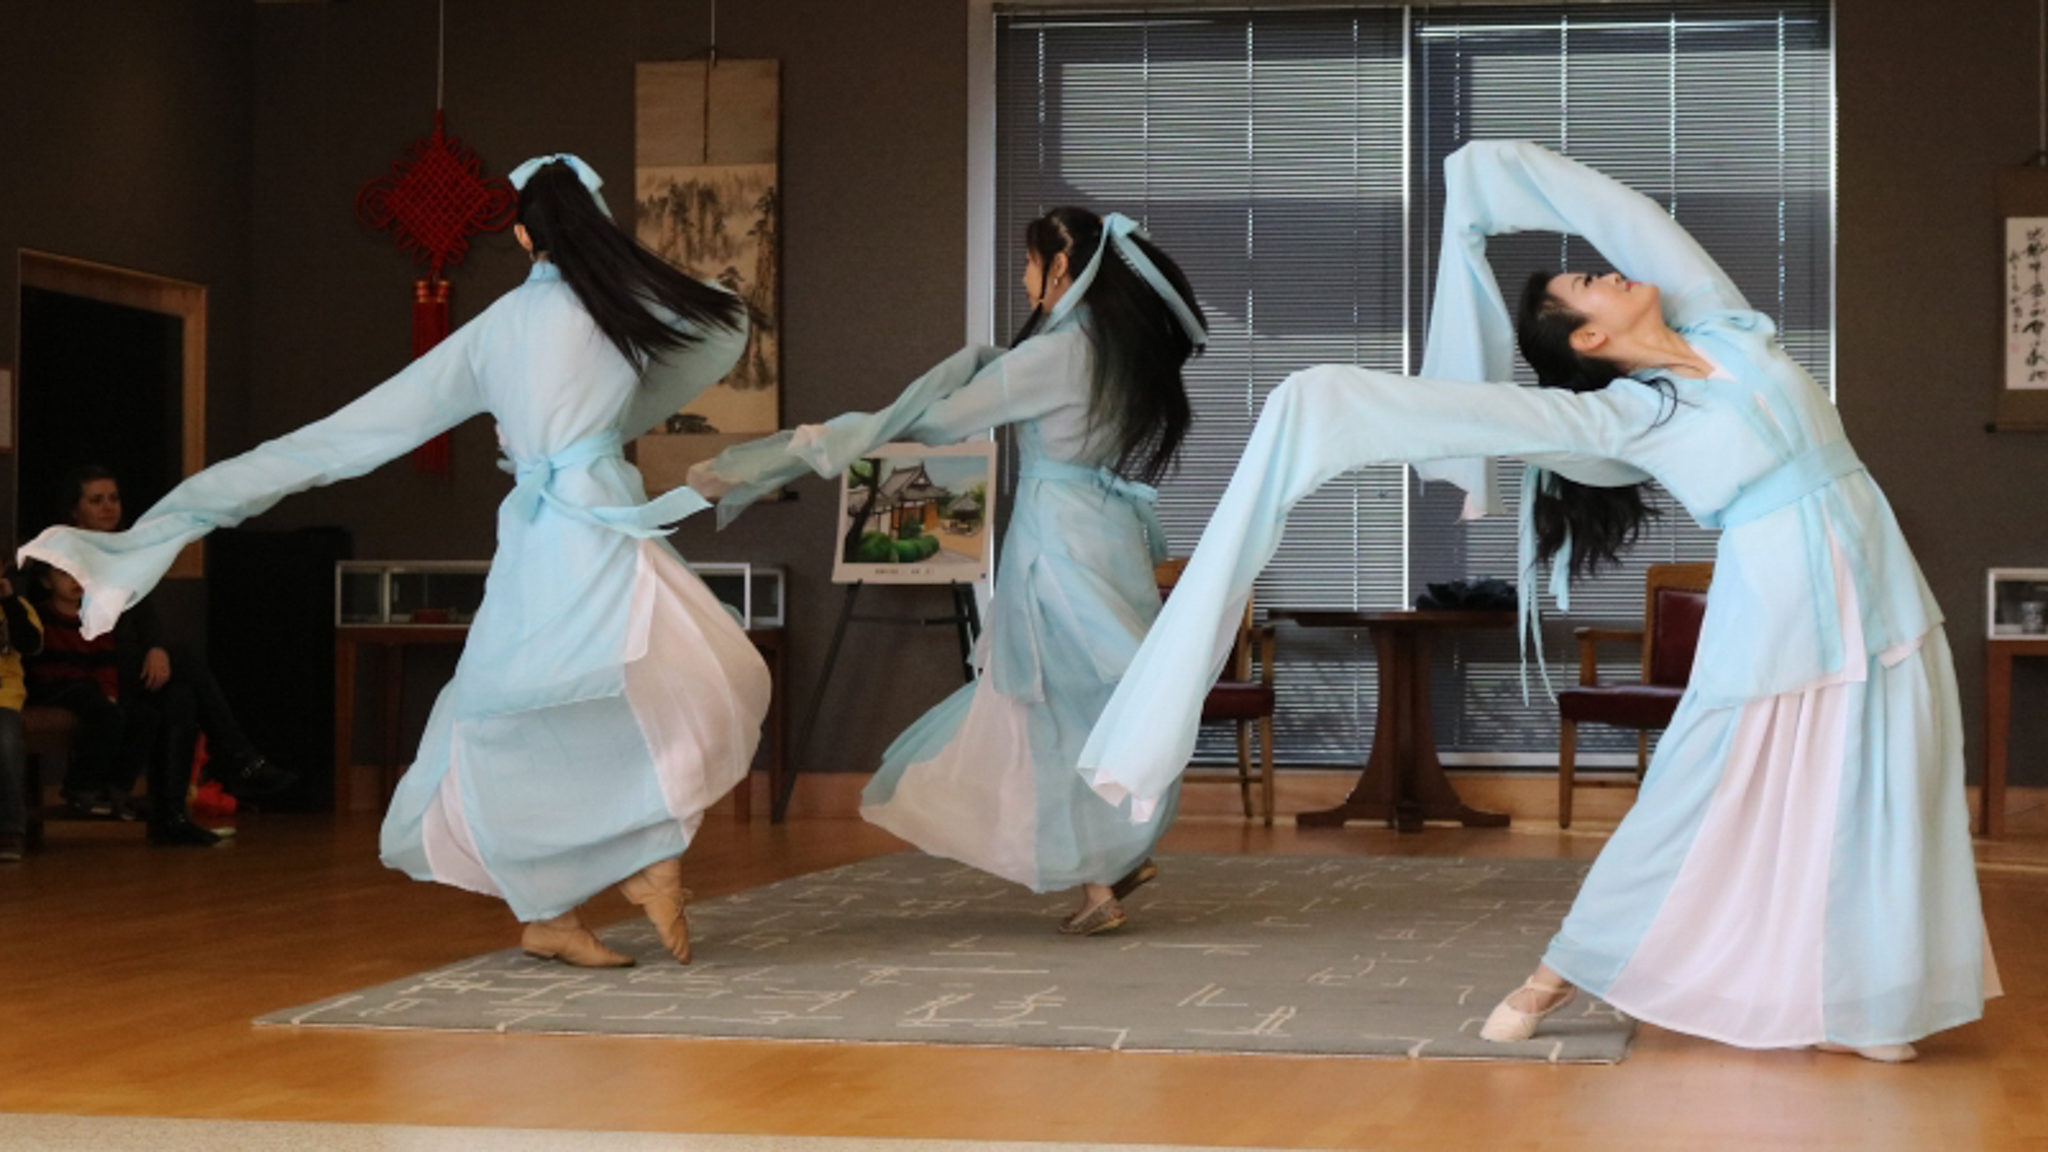 East Asia Institute performance at Schusterman Library